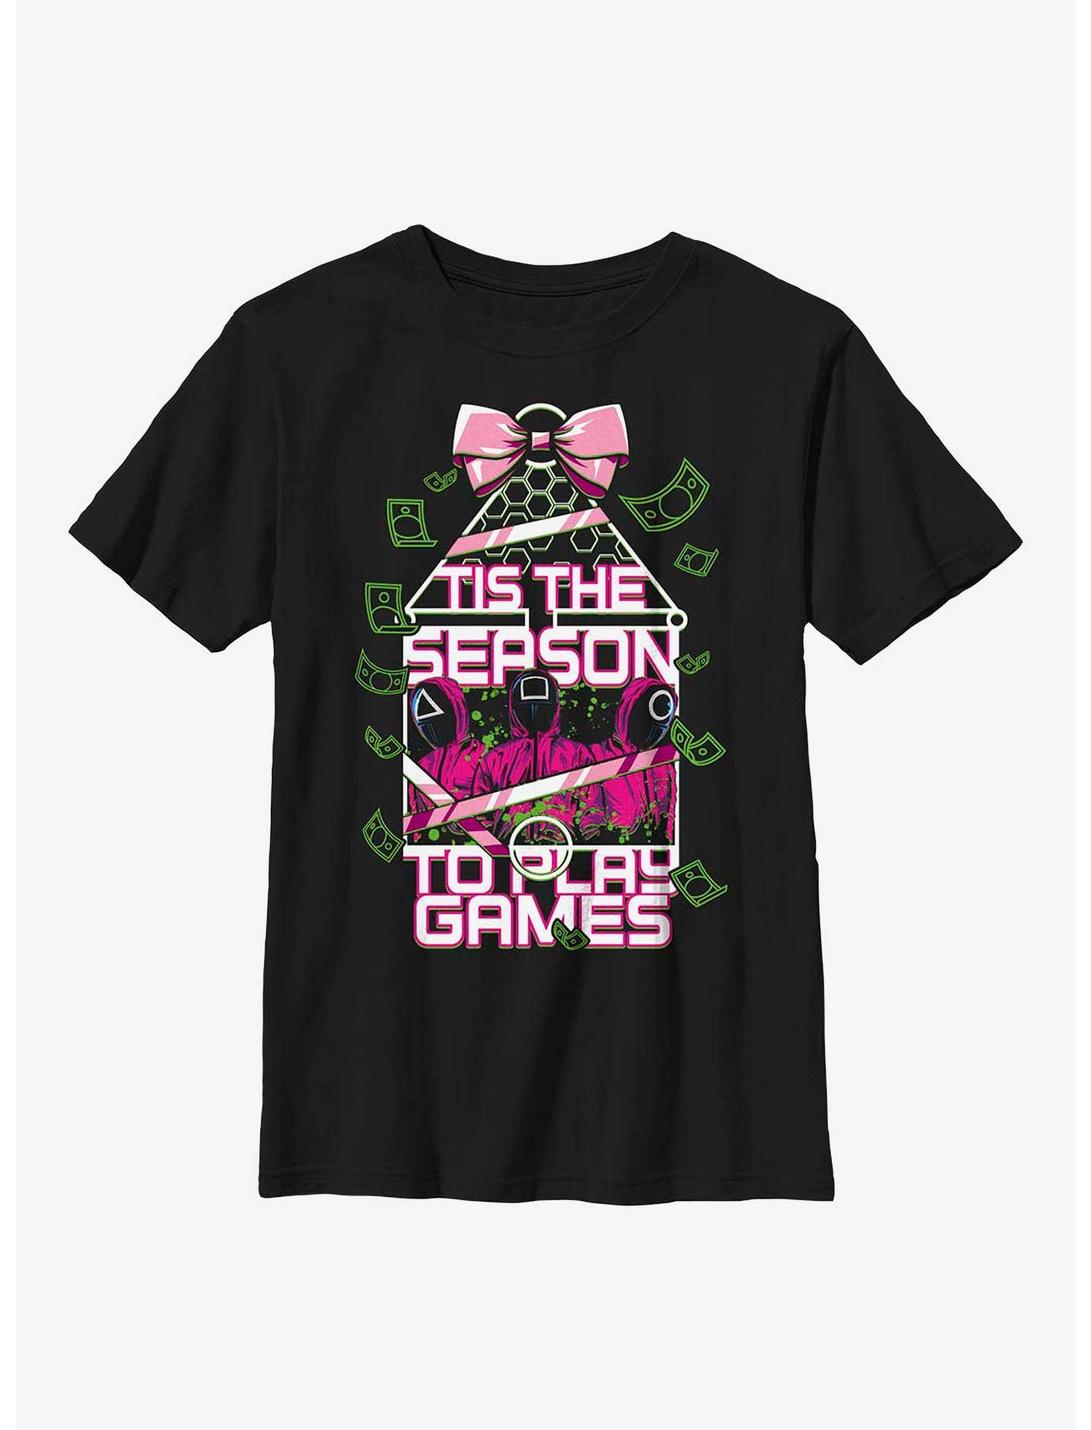 Squid Game Tis The Season To Play Games Youth T-Shirt, BLACK, hi-res